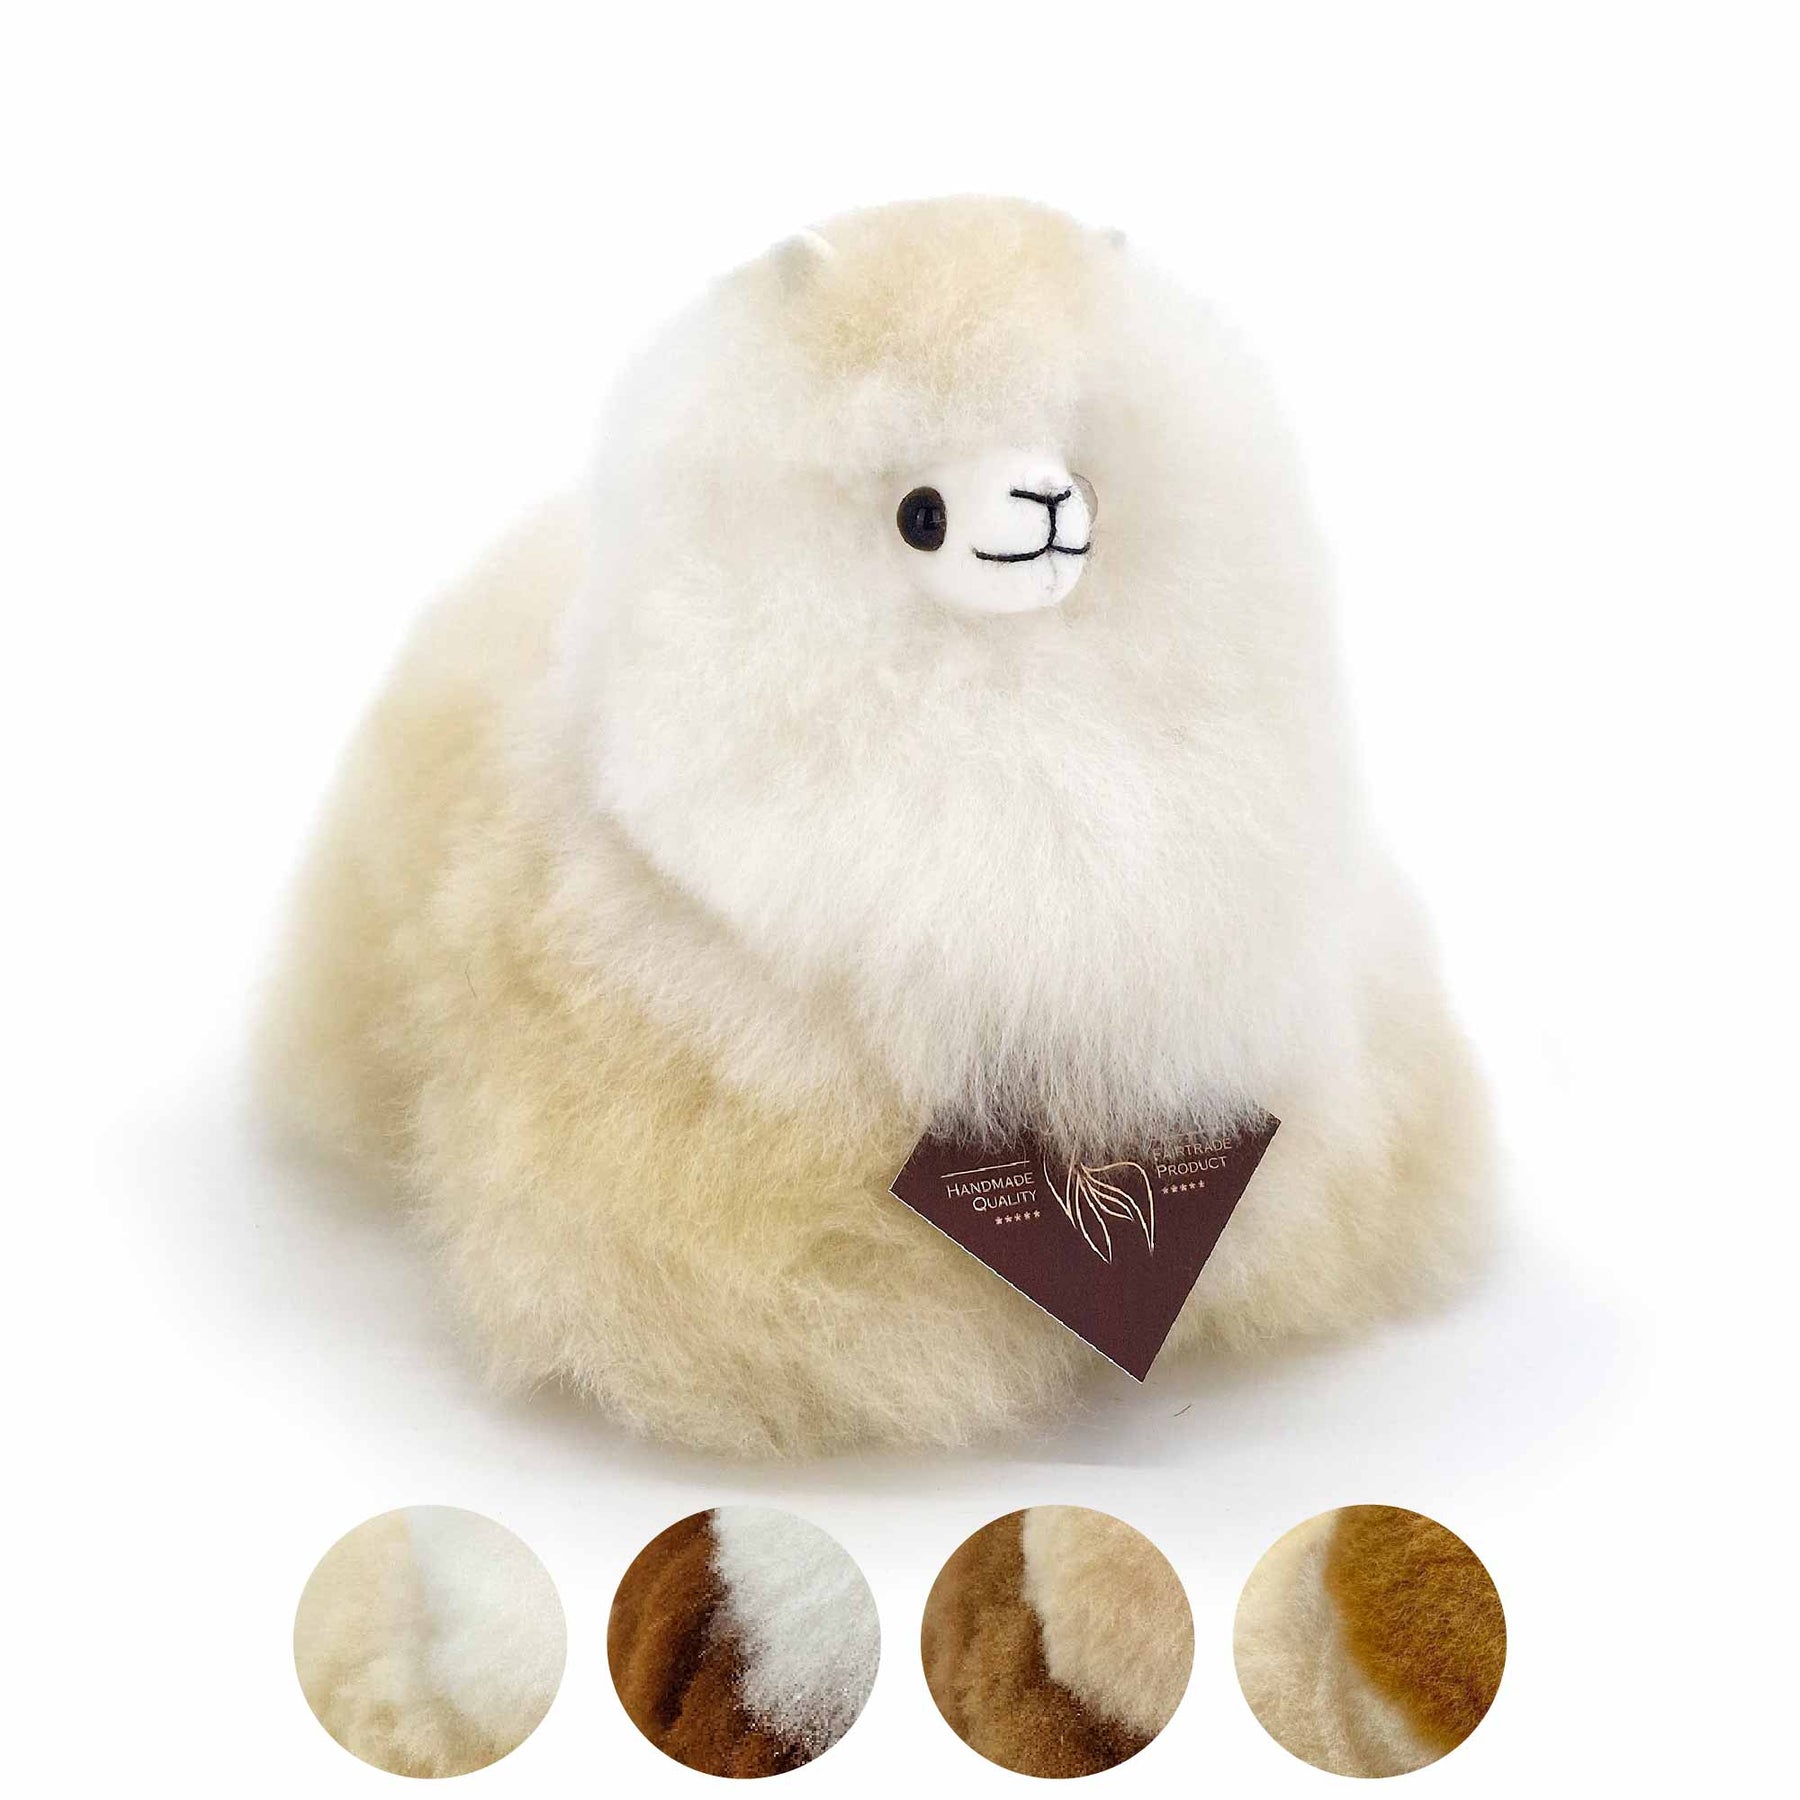 Naturals - All Sizes ❤ Fluffy Toy Stuffed Animal Fairtrade Gift